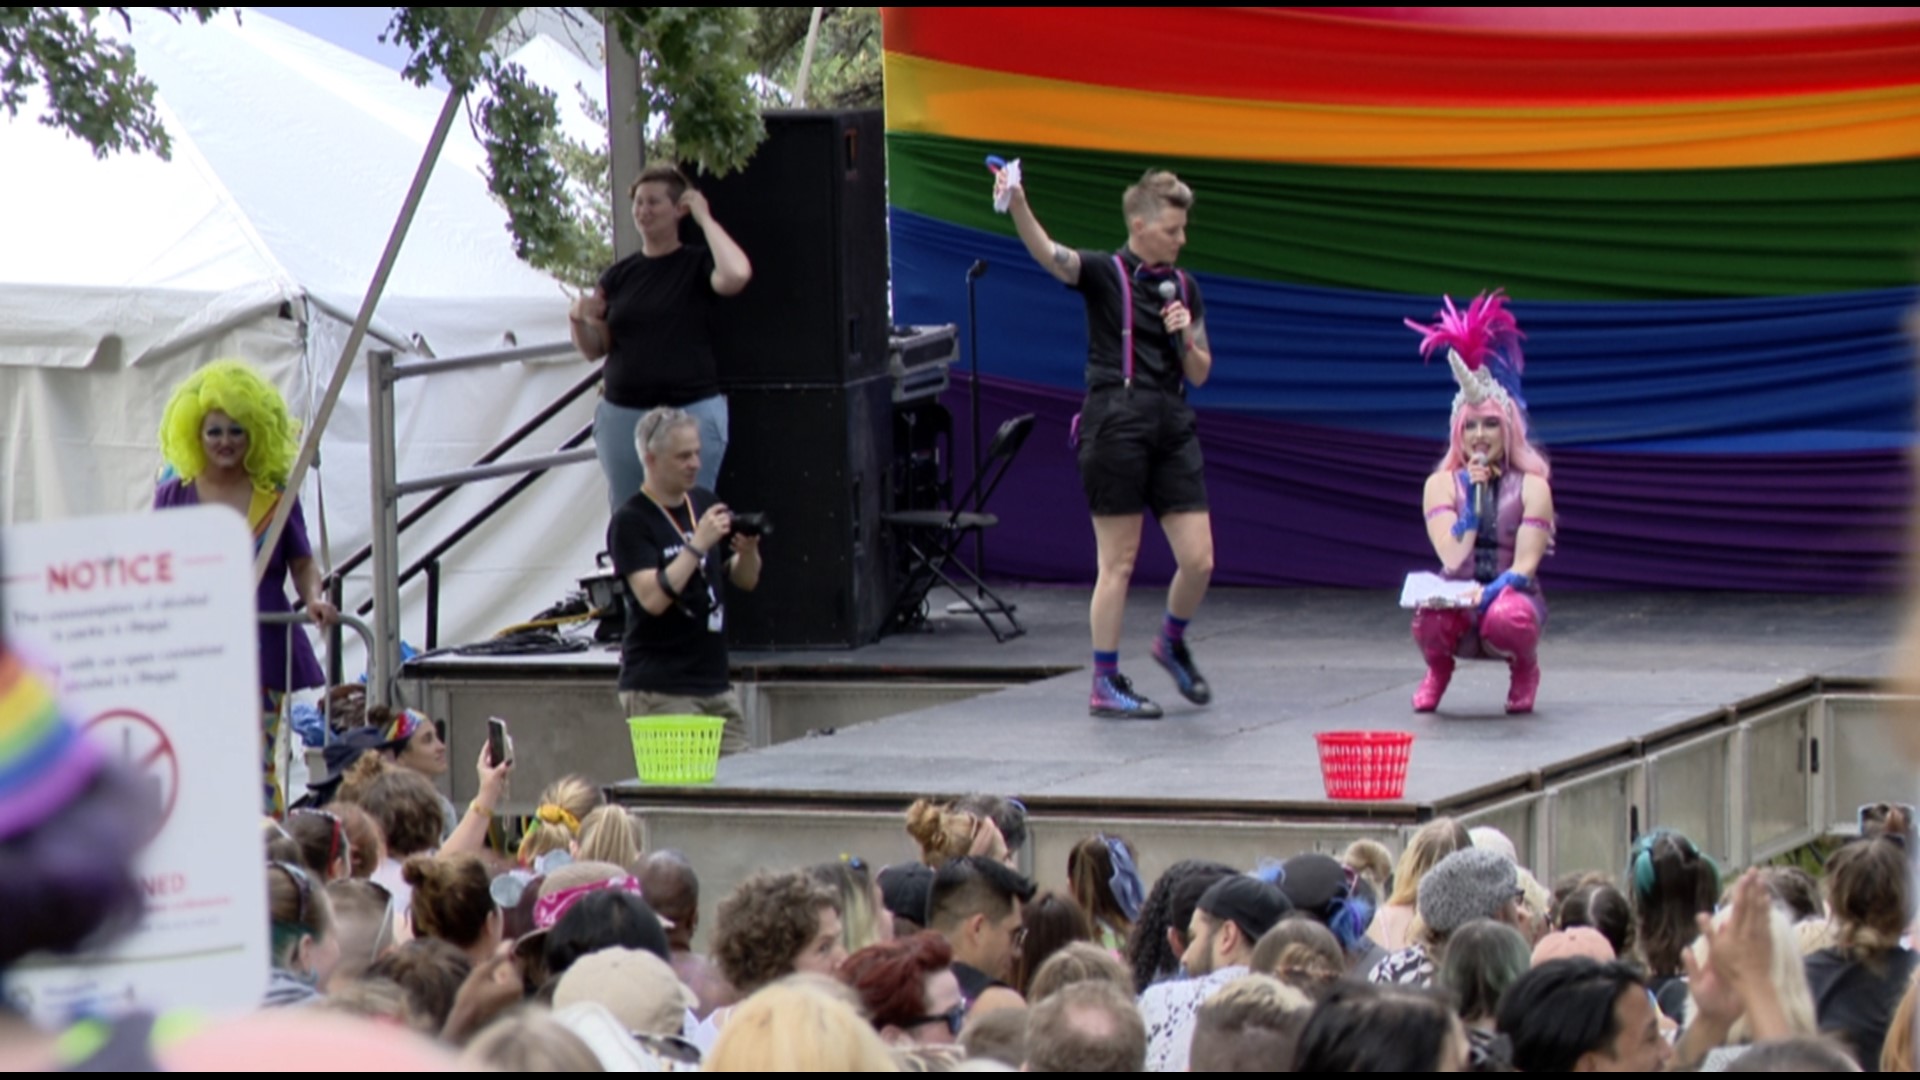 One day after the Supreme Court ruling that overturned Roe v. Wade, attendees at Twin Cities Pride said the celebration felt like a much-needed escape.